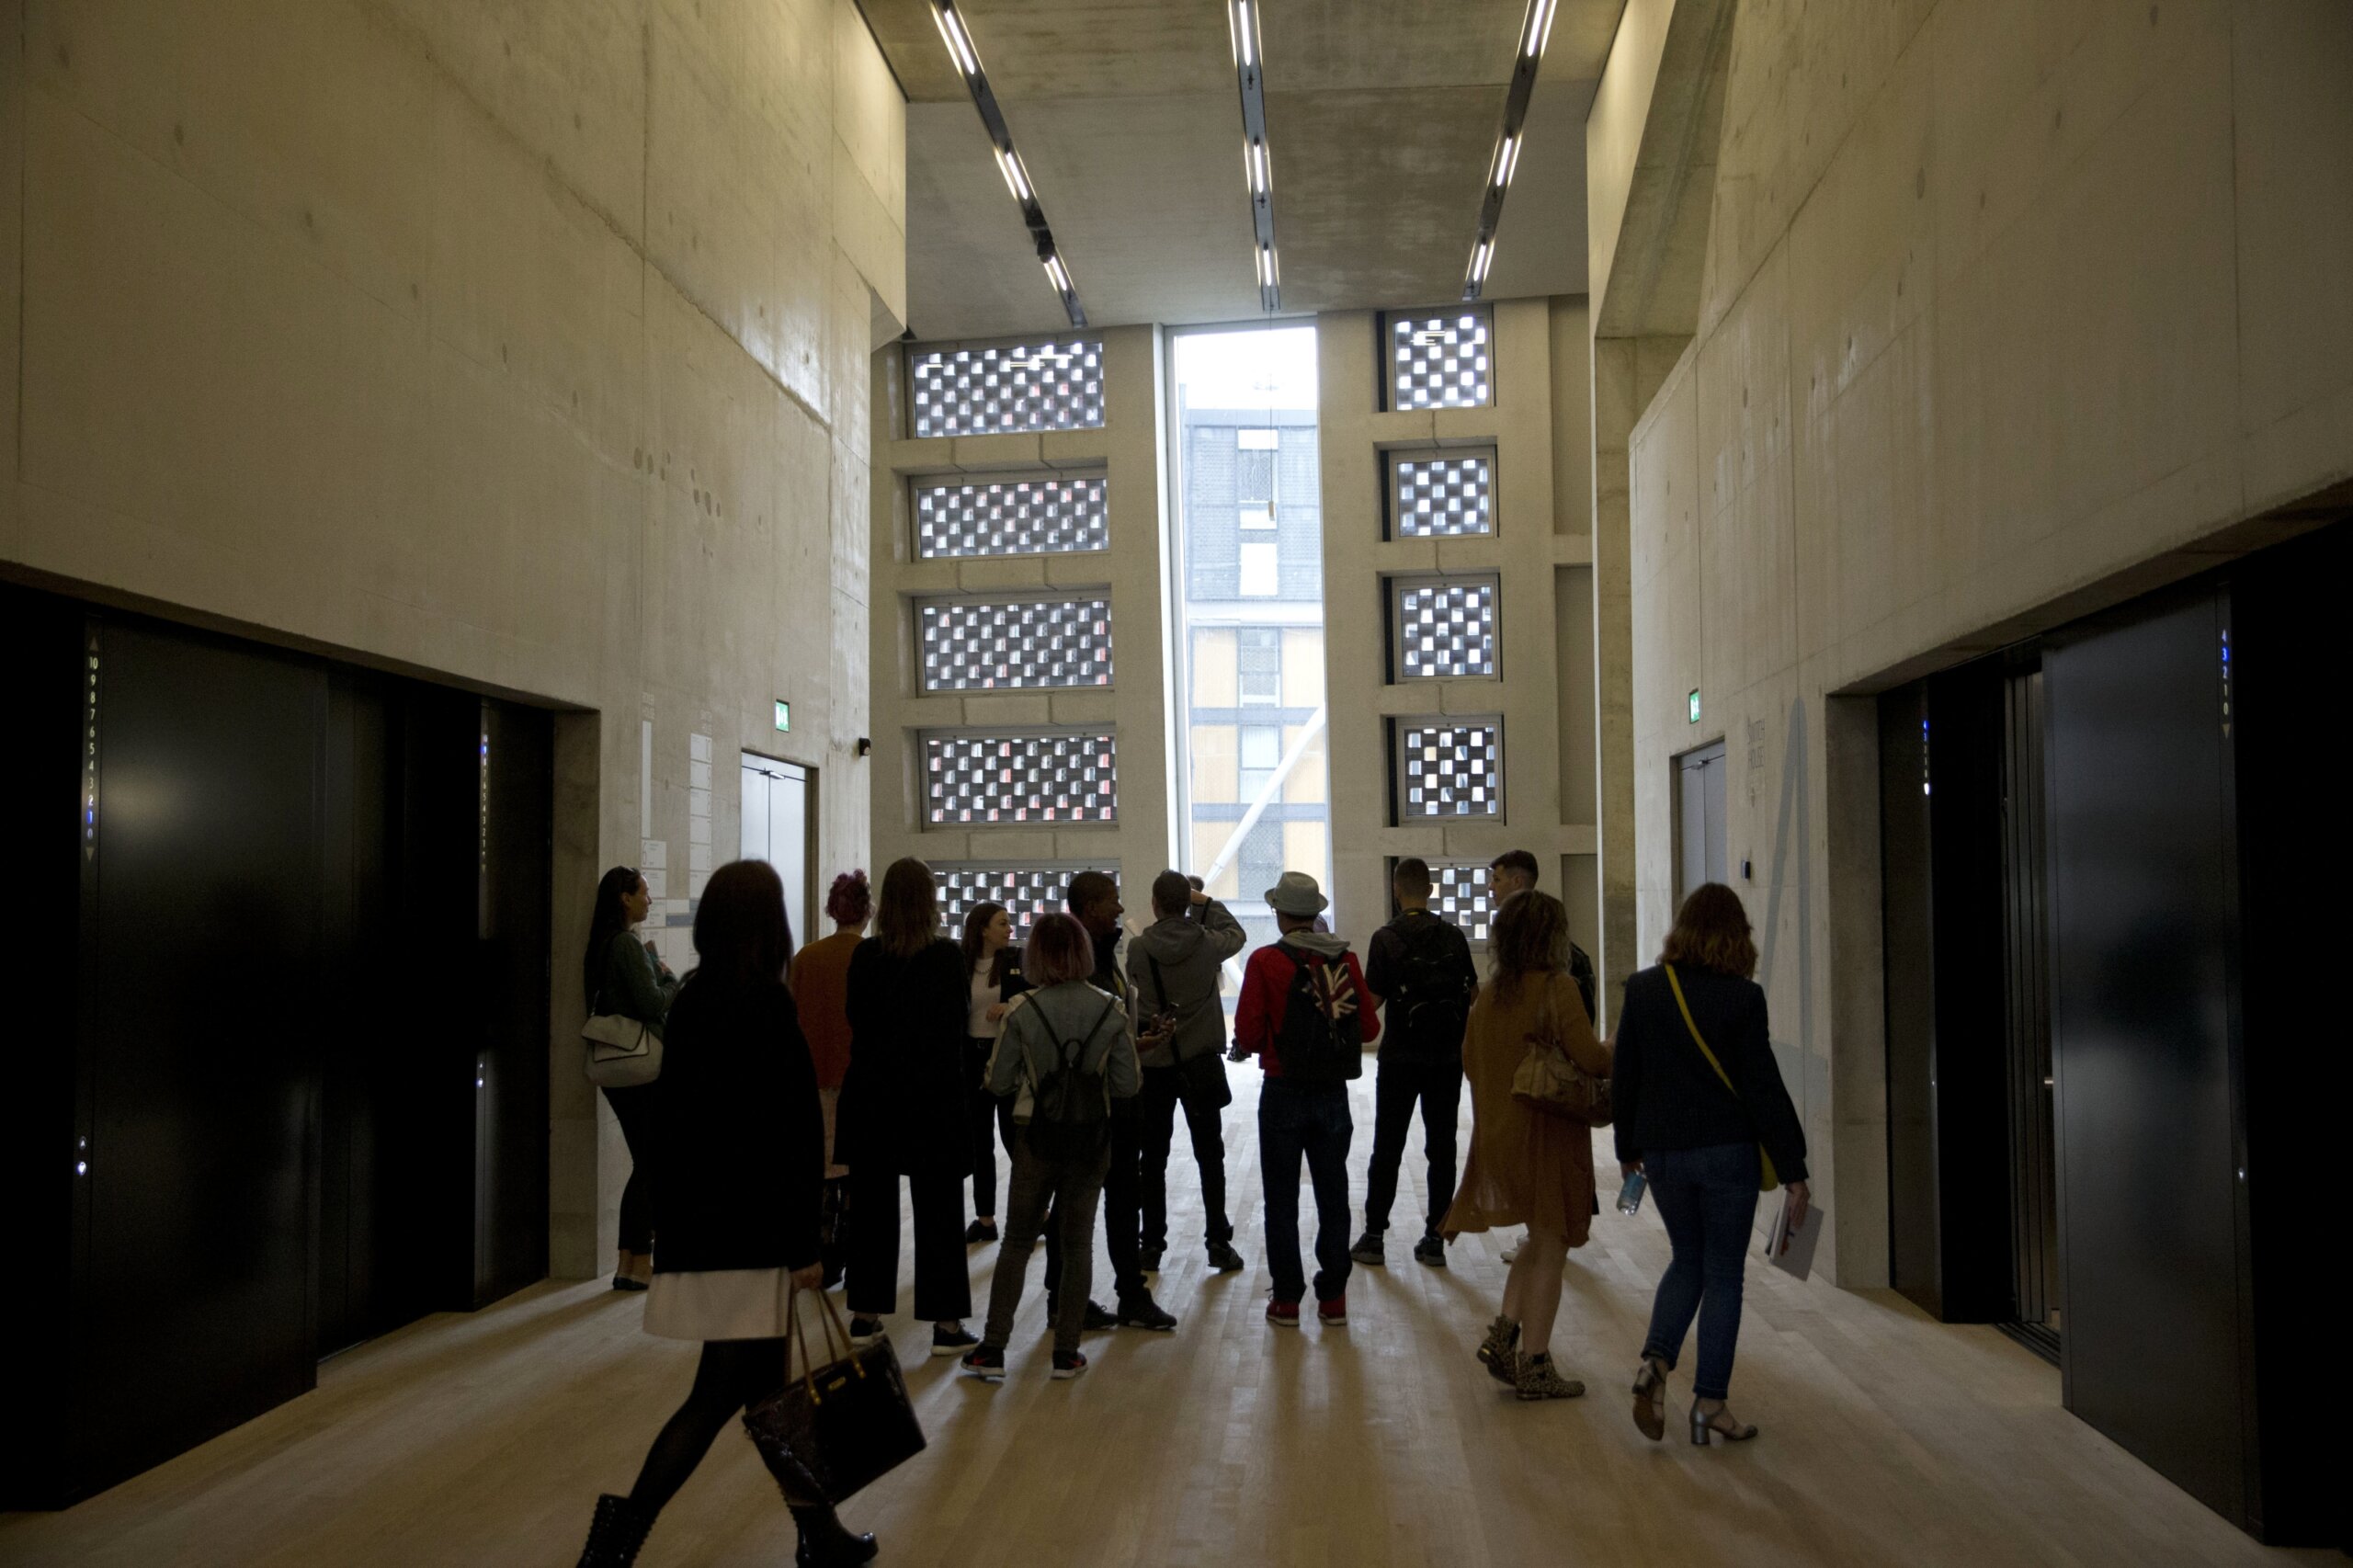 Prying eyes: Neighbors win privacy feud with UK Tate gallery